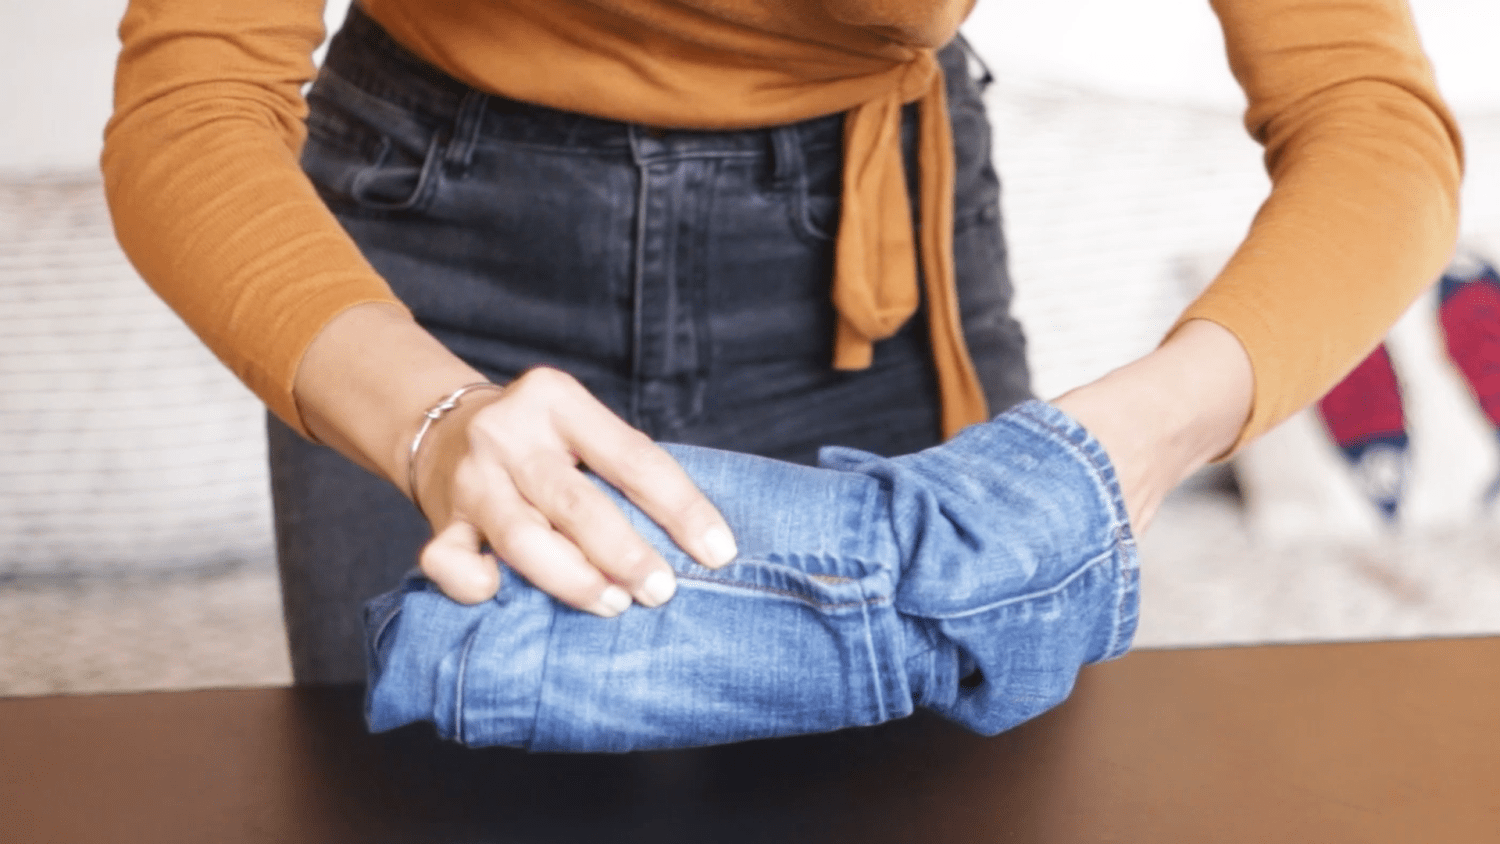 Woman reveals genius tip for tightening your jeans without a belt - and  it's so simple